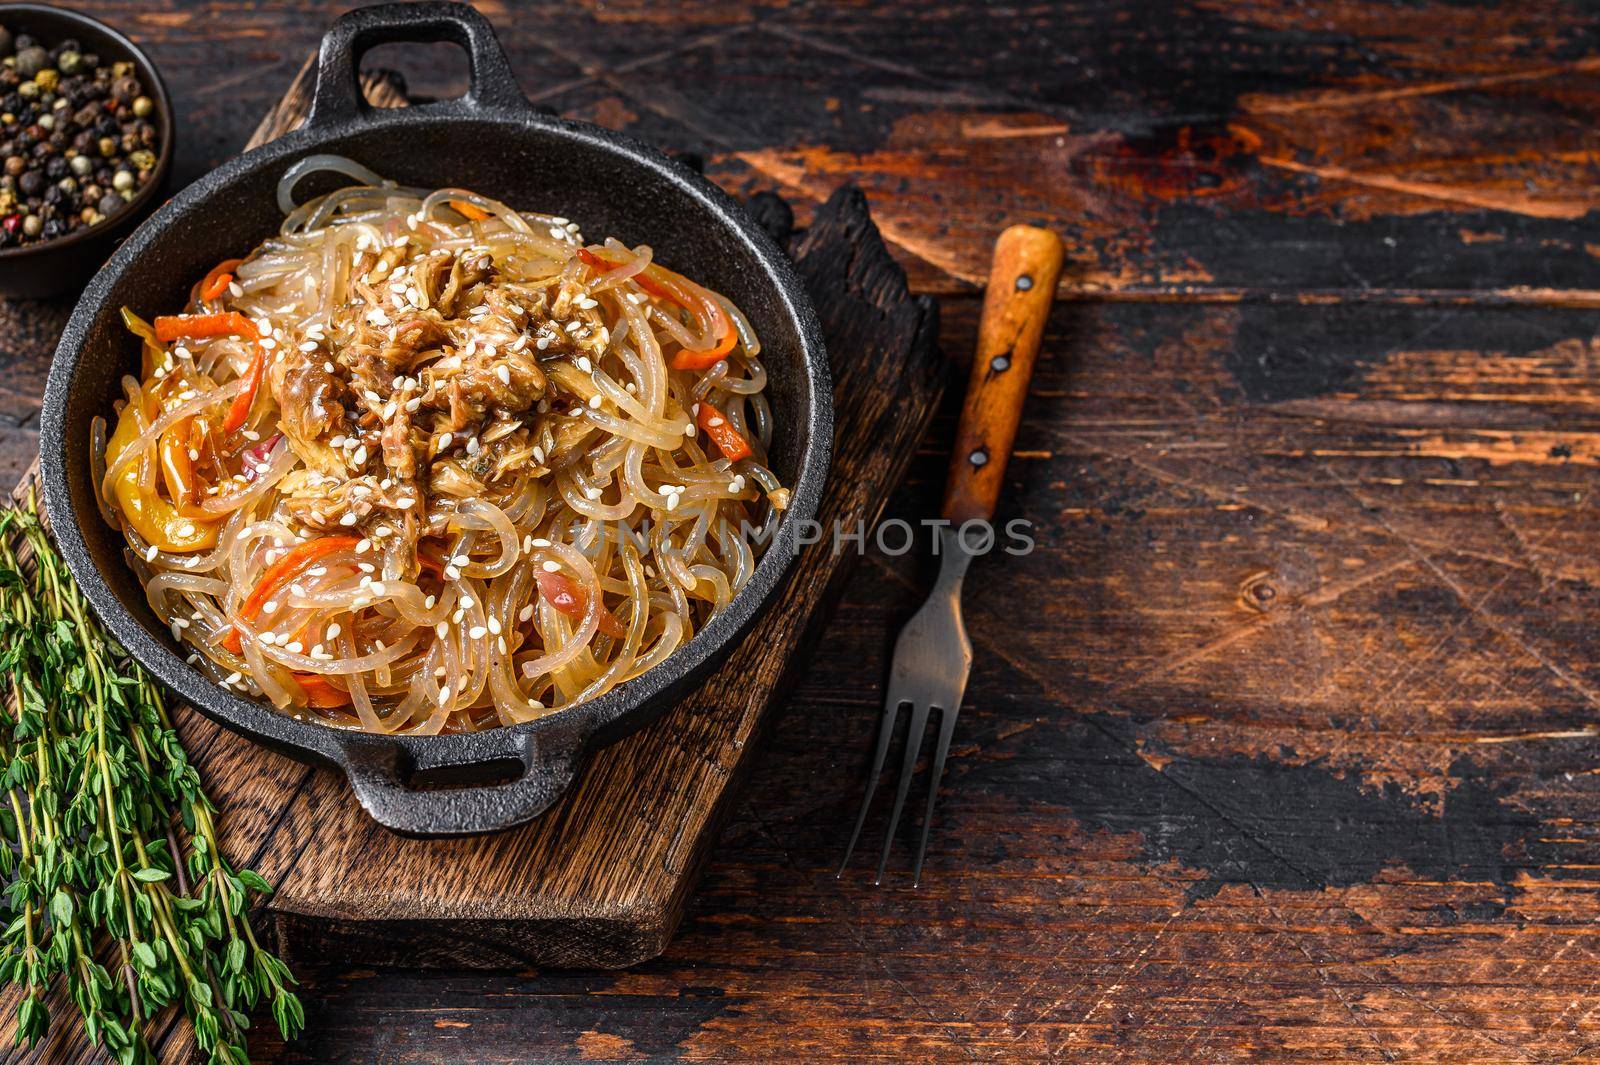 Soy glass noodles with shiitake mushrooms and chicken meat. Wooden background. Top view. Copy space.